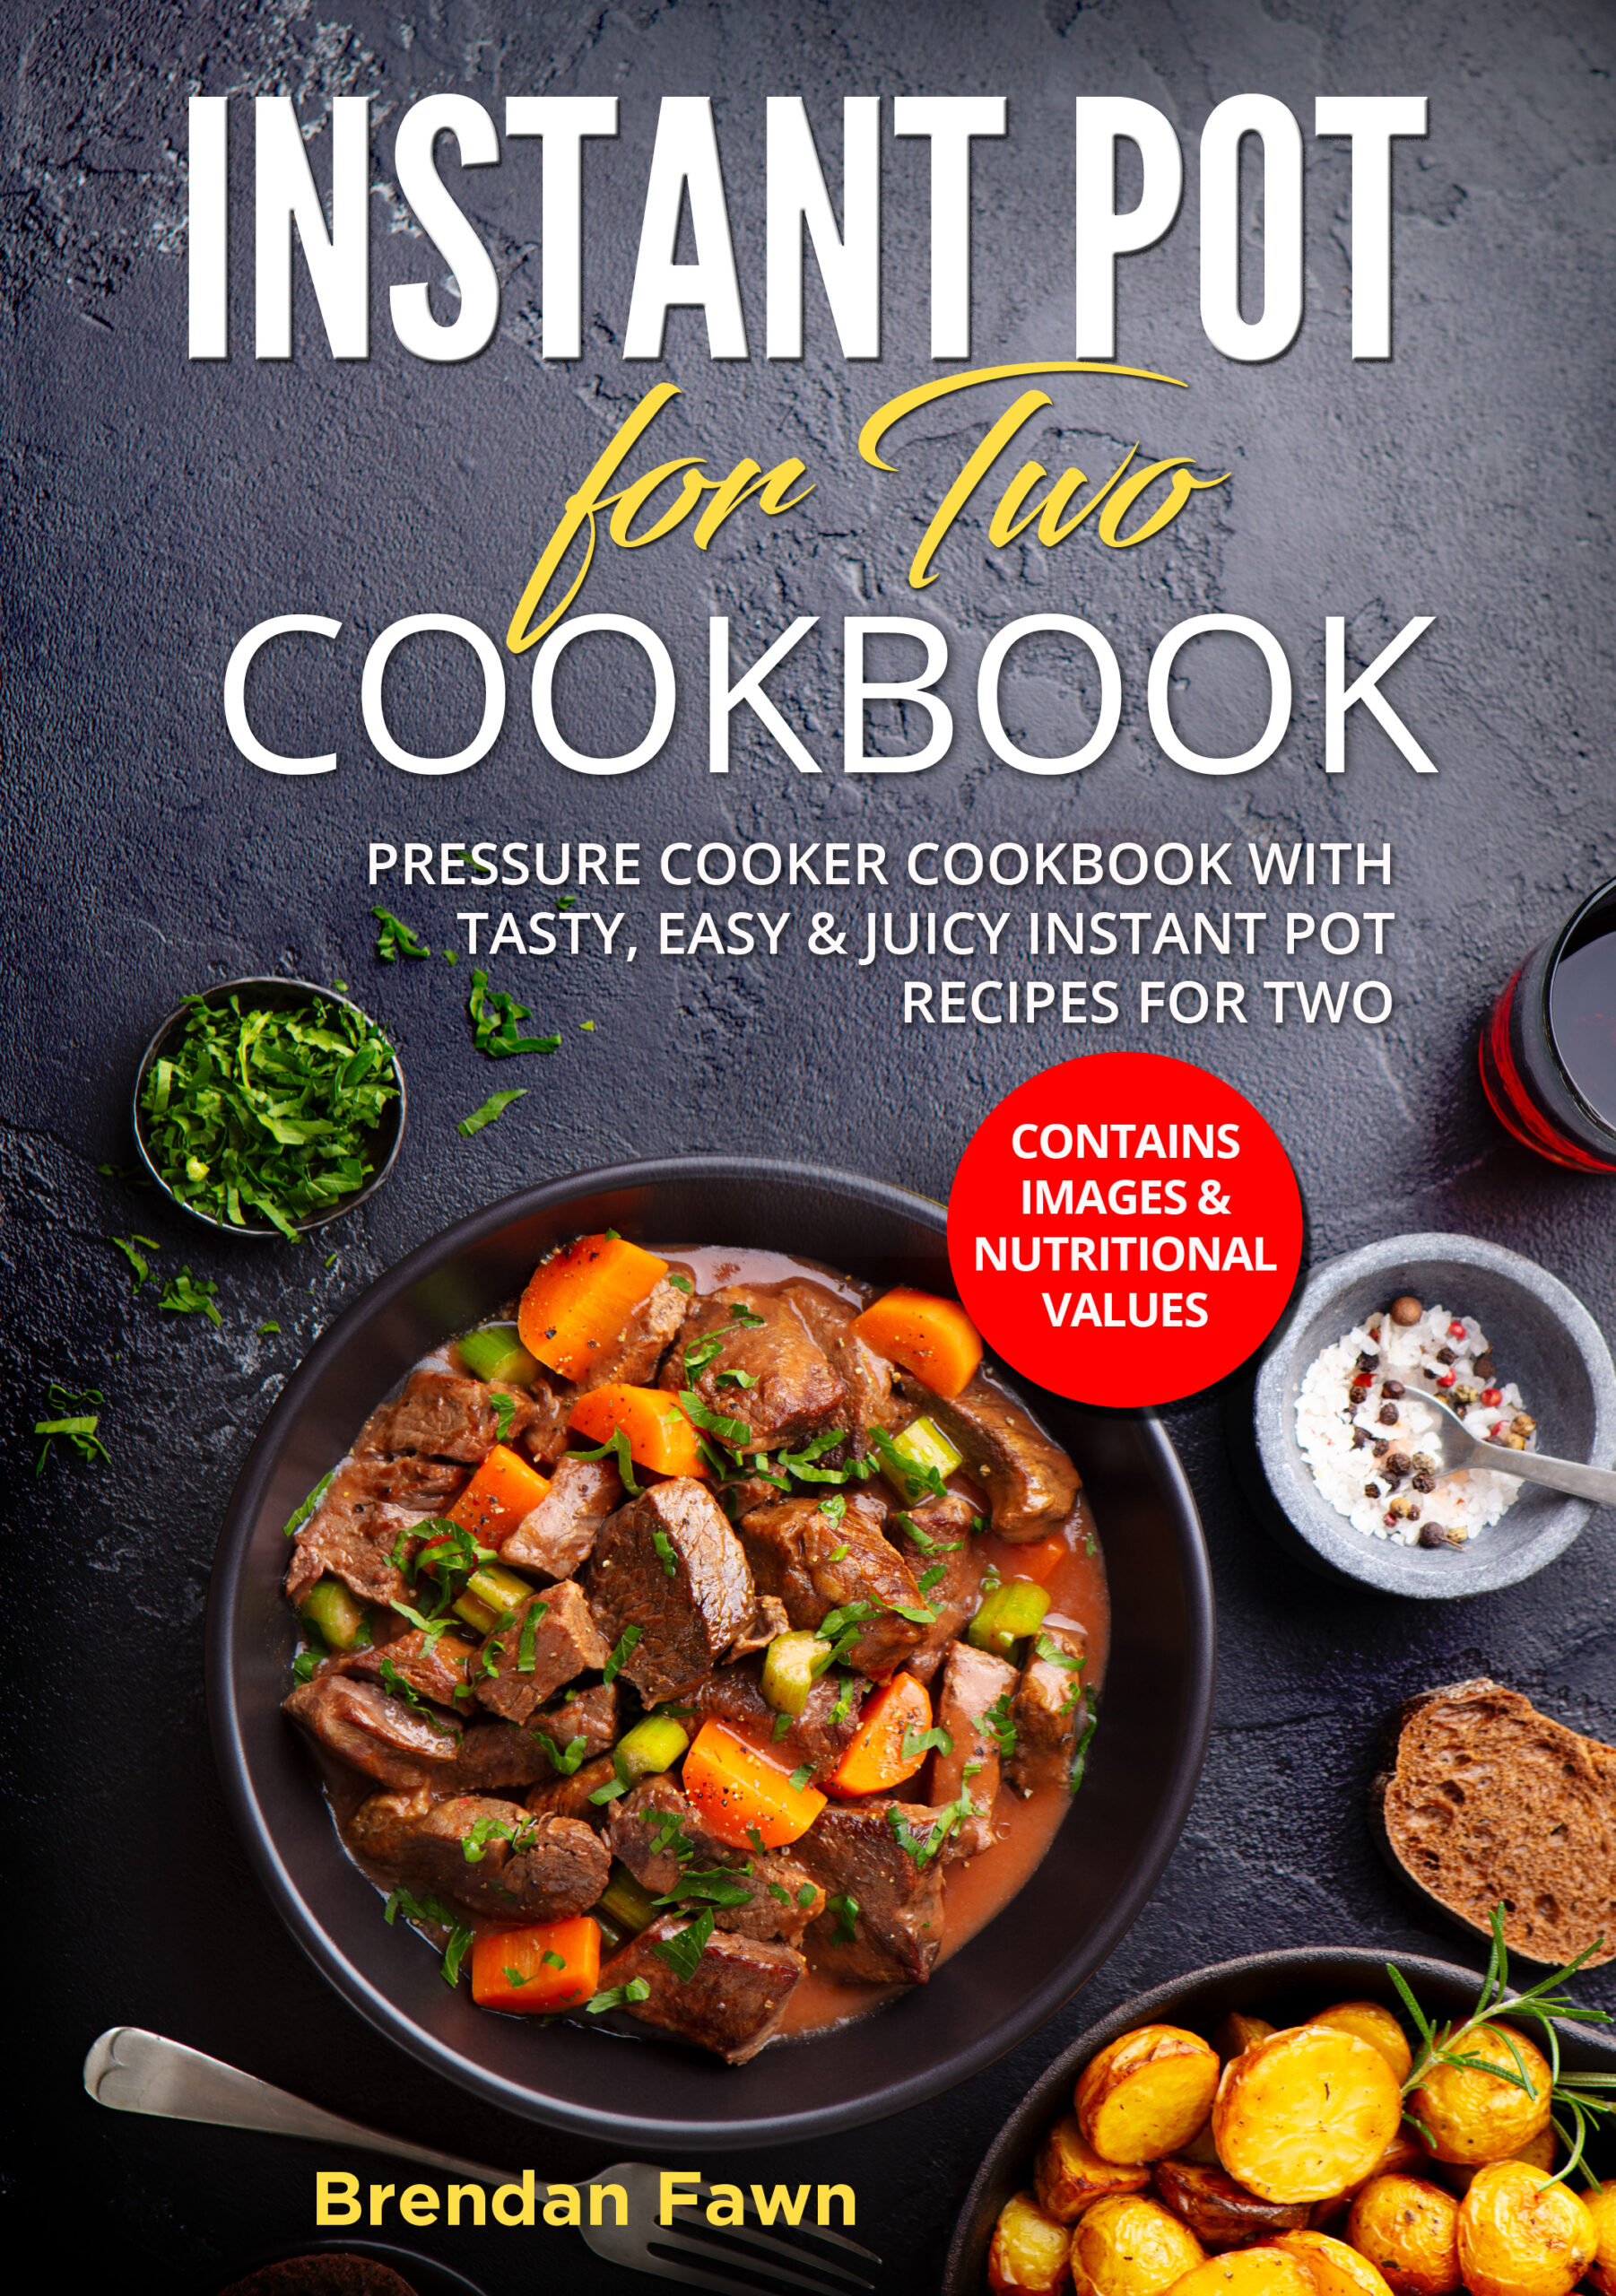 FREE: Instant Pot for Two Cookbook: Pressure Cooker Cookbook with Tasty, Easy & Juicy Instant Pot Recipes for Two by Brendan Fawn